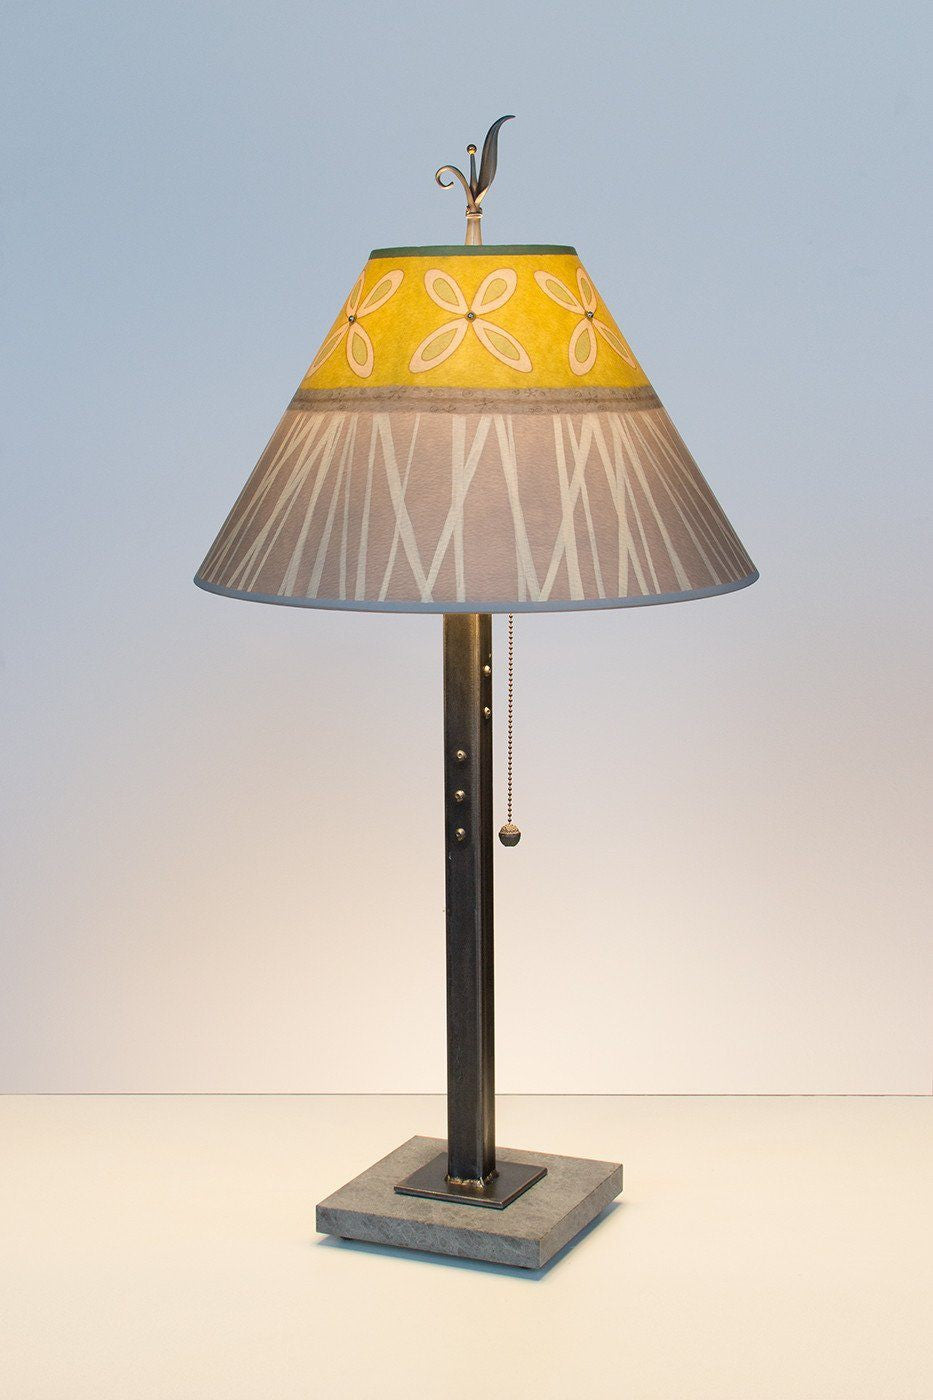 Janna Ugone & Co Table Lamps Steel Table Lamp with Medium Conical Shade in Kiwi